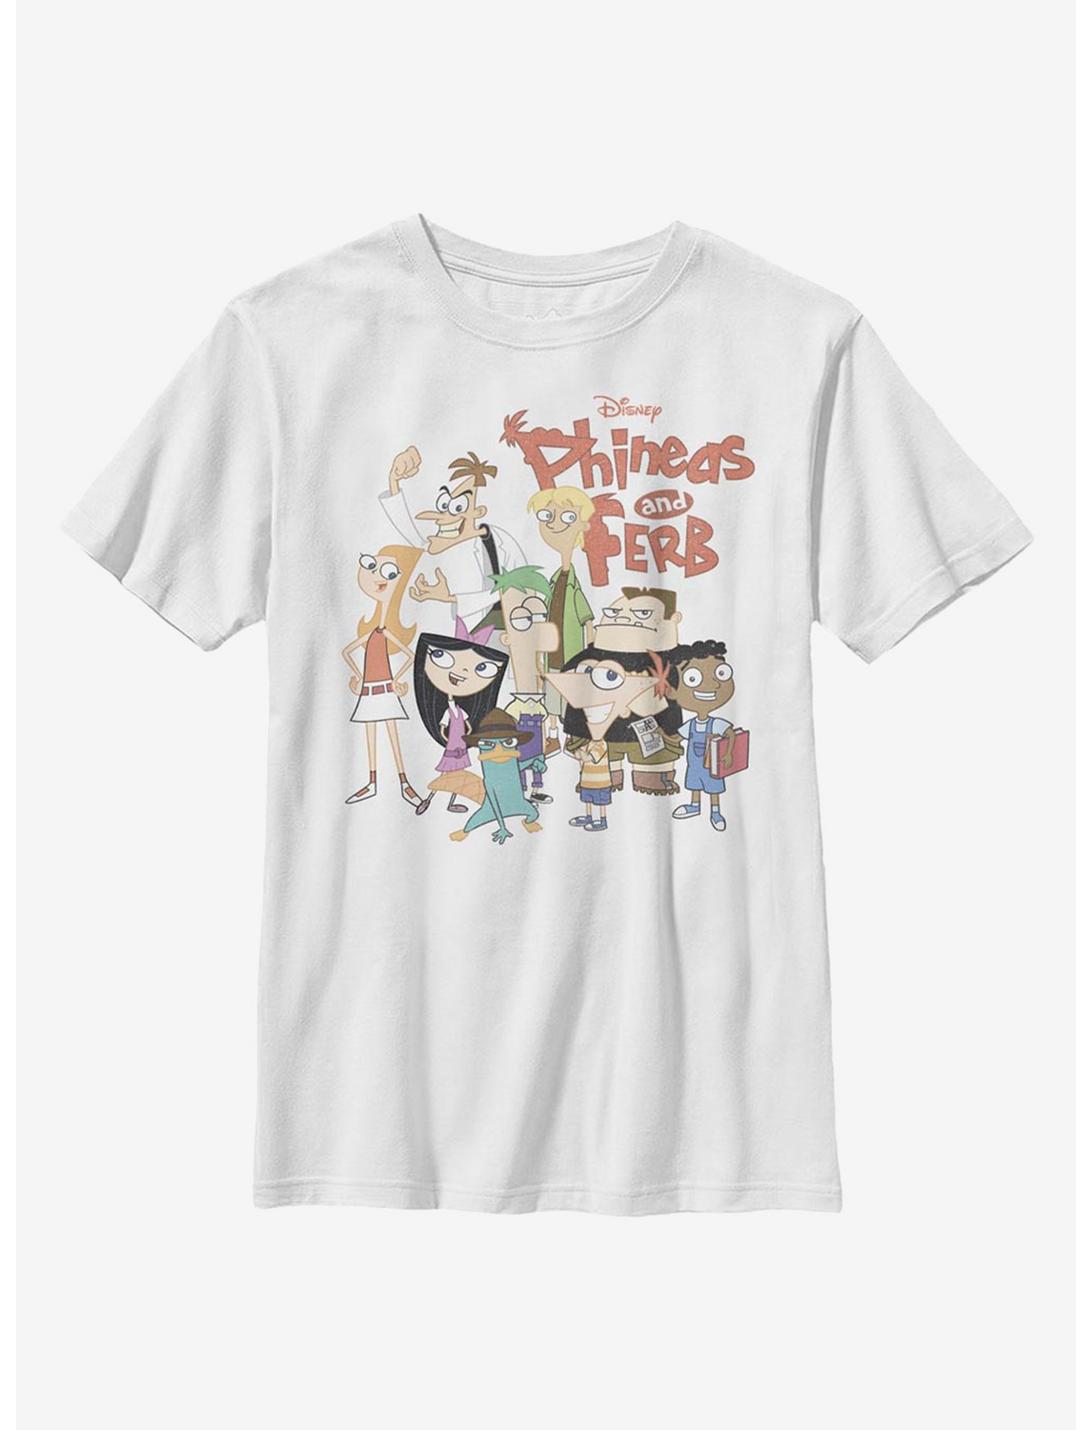 Disney Phineas And Ferb The Group Youth T-Shirt, WHITE, hi-res